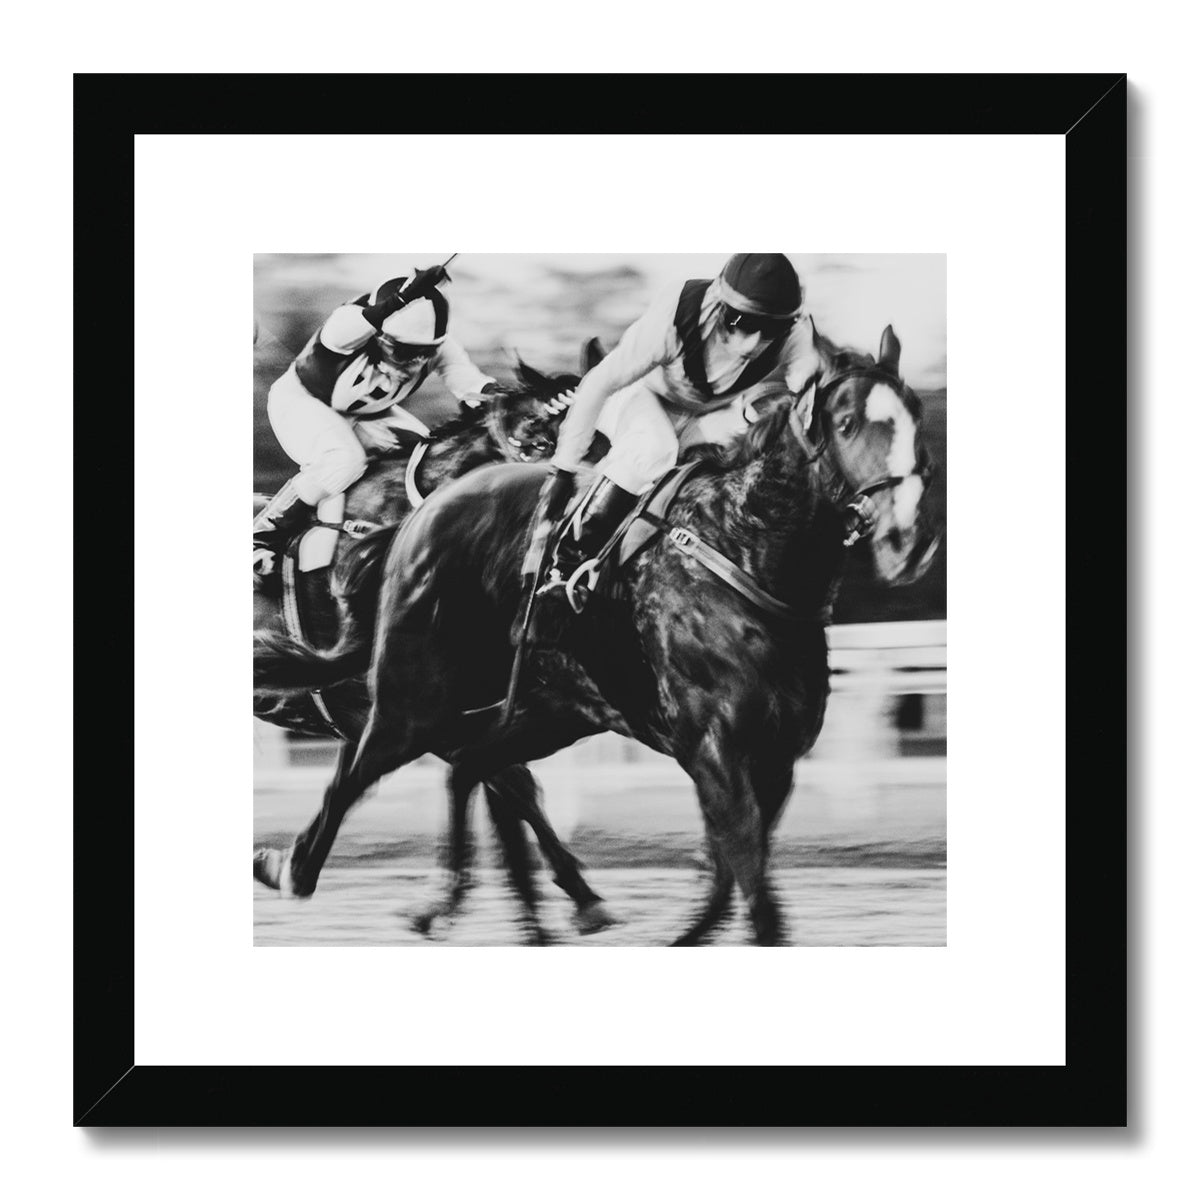 Takes two to tango Framed & Mounted Print